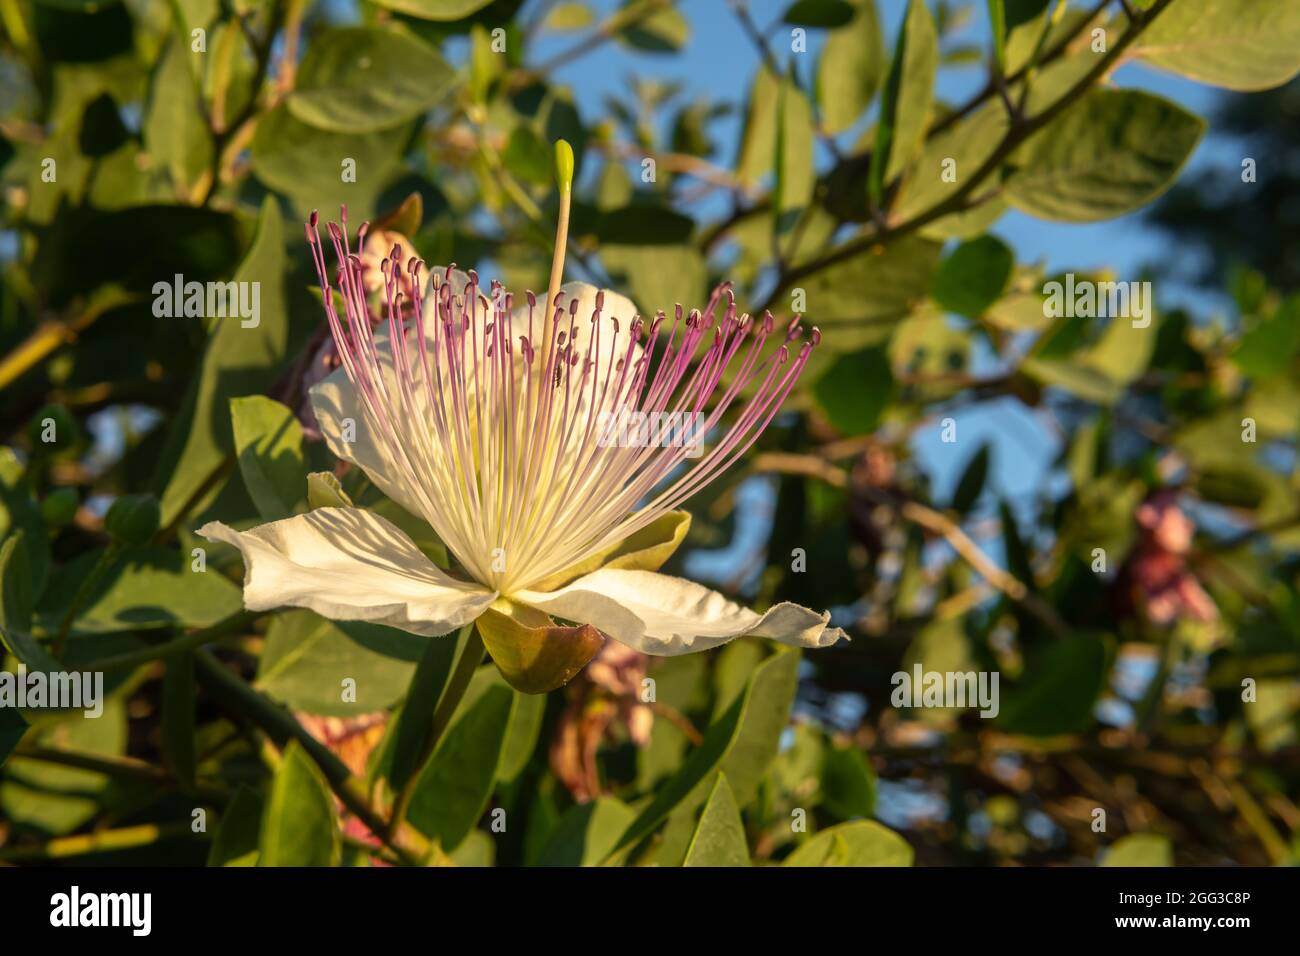 Close-up of the flower of the Caper plant, Capparis spinosa, at sunset. Island of Mallorca, Spain Stock Photo